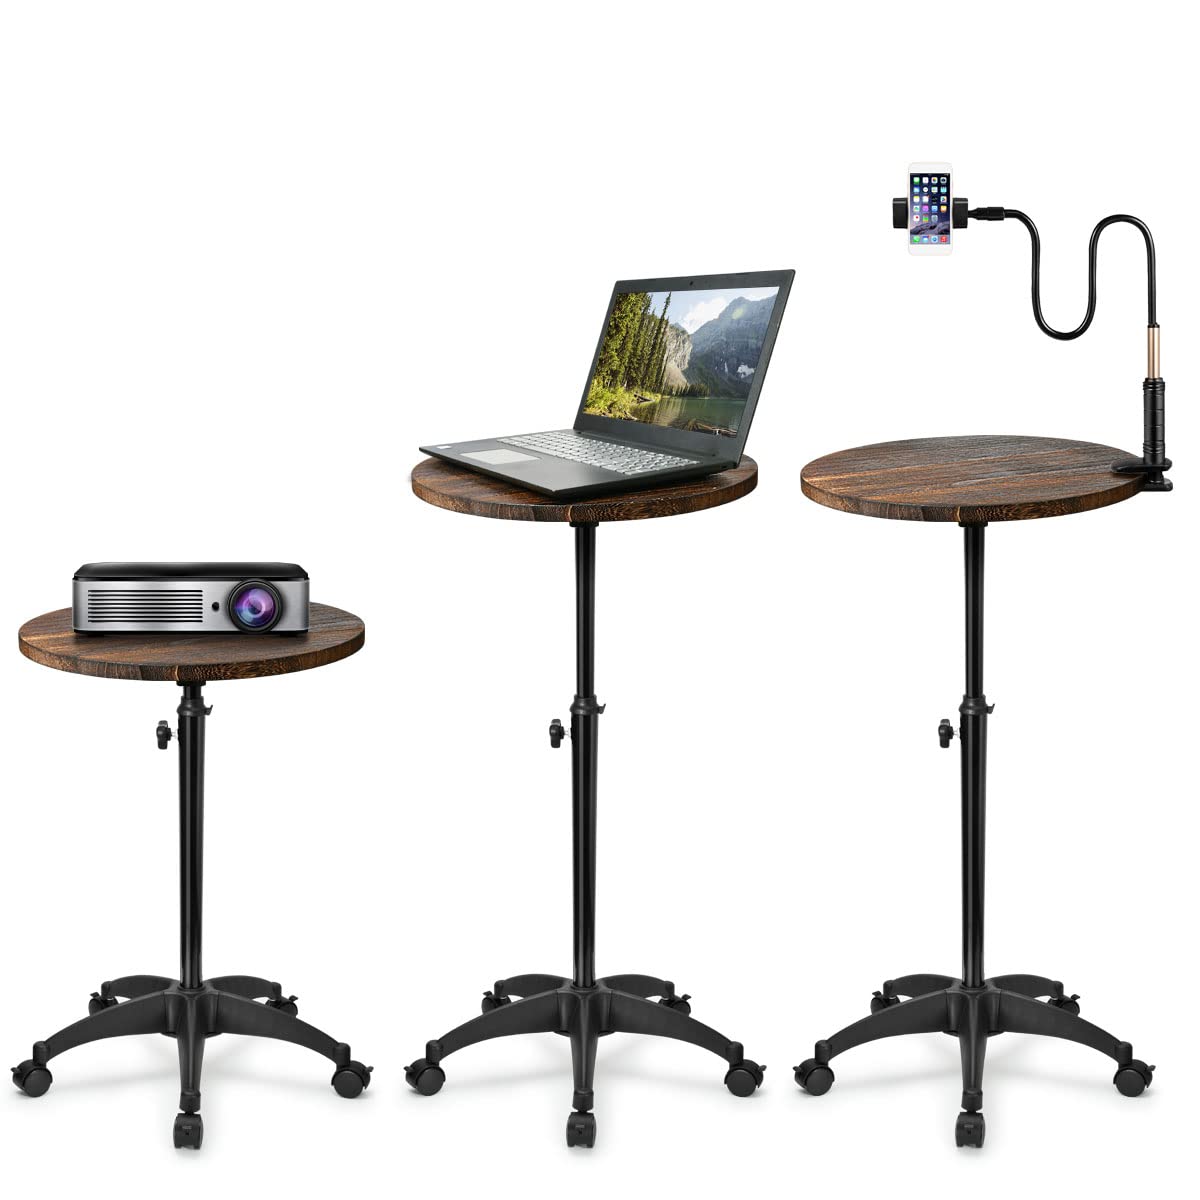 Shrivee Adjustable Height Round Side Table, Multifunctional Mobile Workstation, Portable Standing Desk with Brakes Wheels, Small Round Side Table Moved for Living Room, Bedroom, Home Office